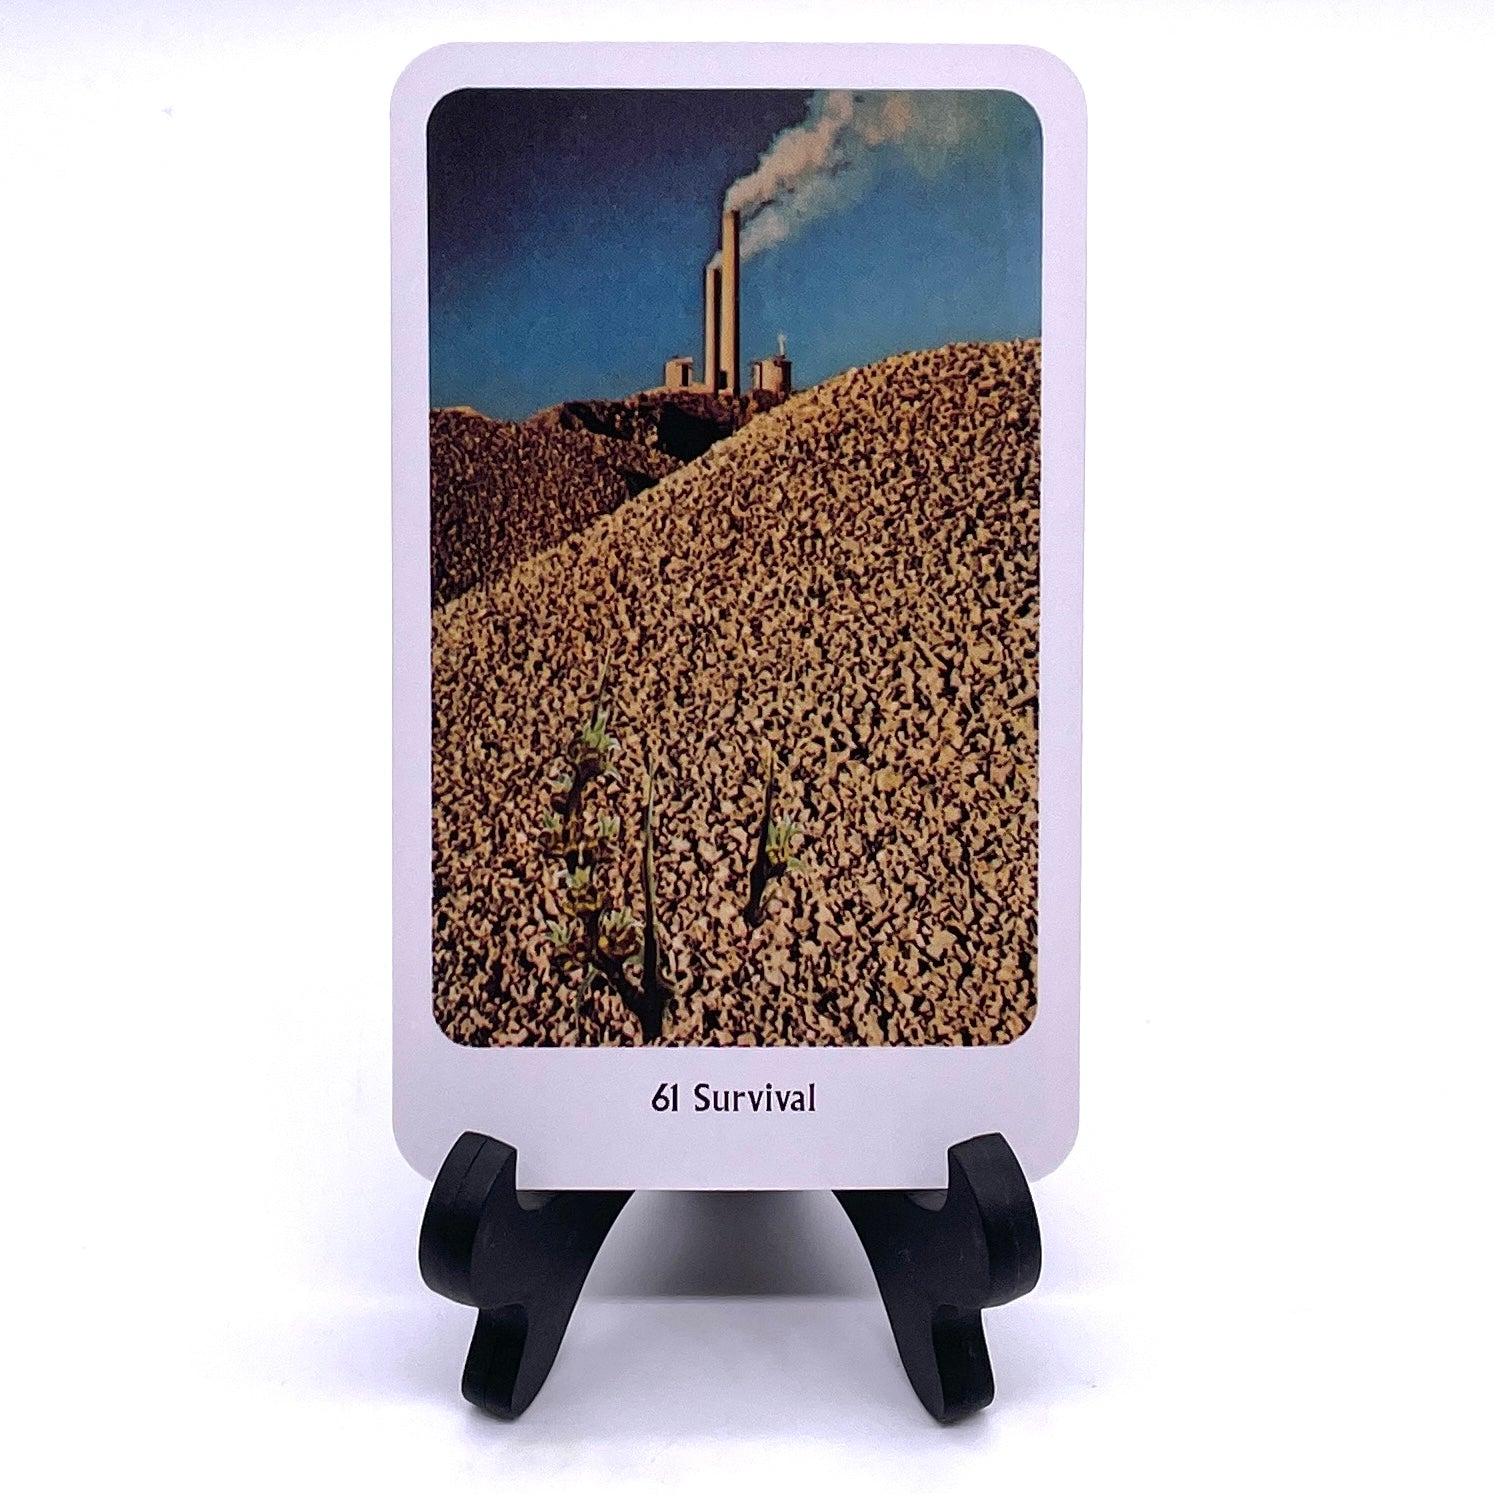 Photo of Card #61, "Survival", featuring collaged images of woodchip piles with smokestacks in the background.